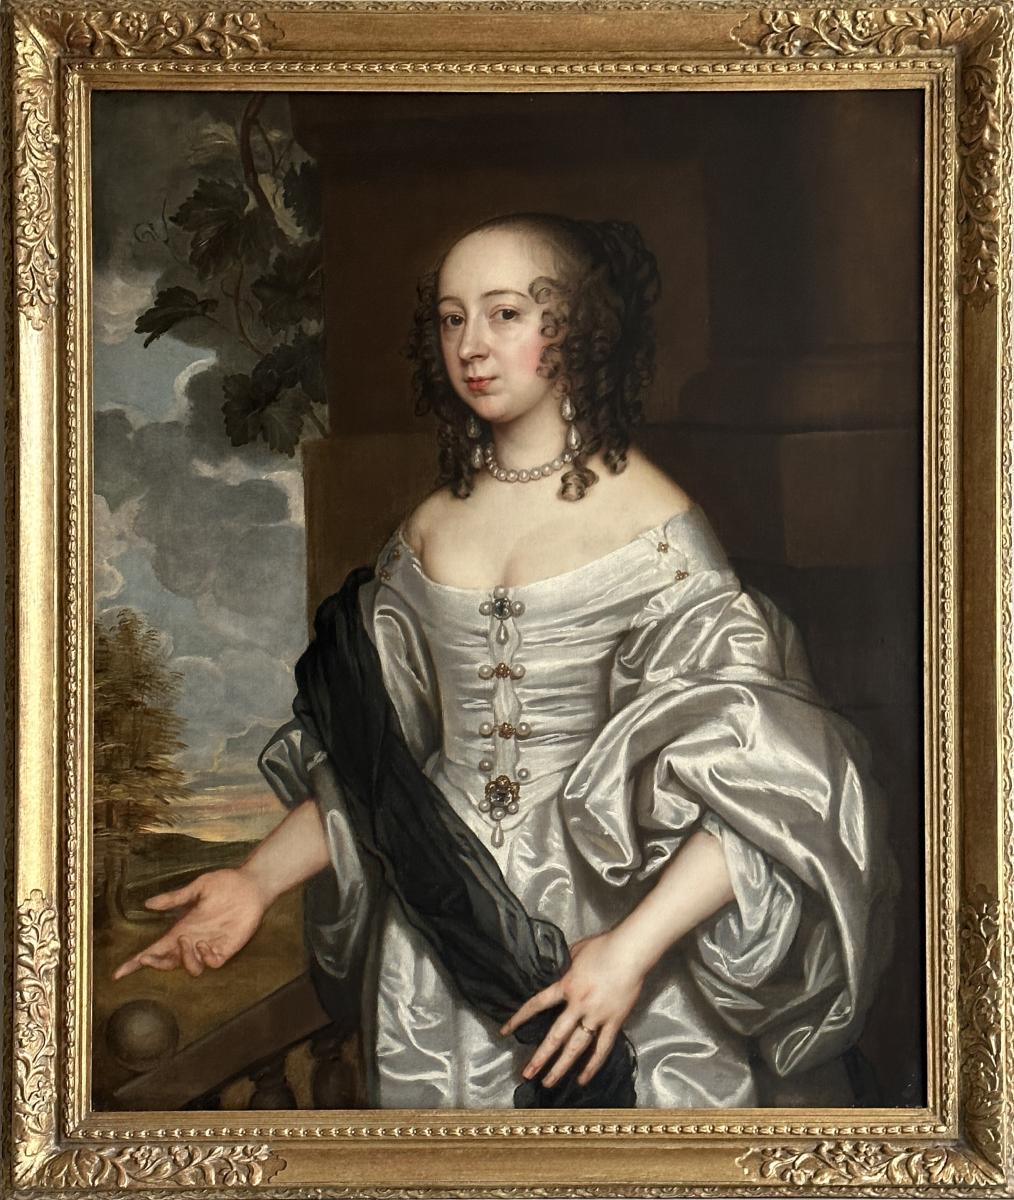 17th century portrait of a lady by John Greenhill (c.1644-1676)